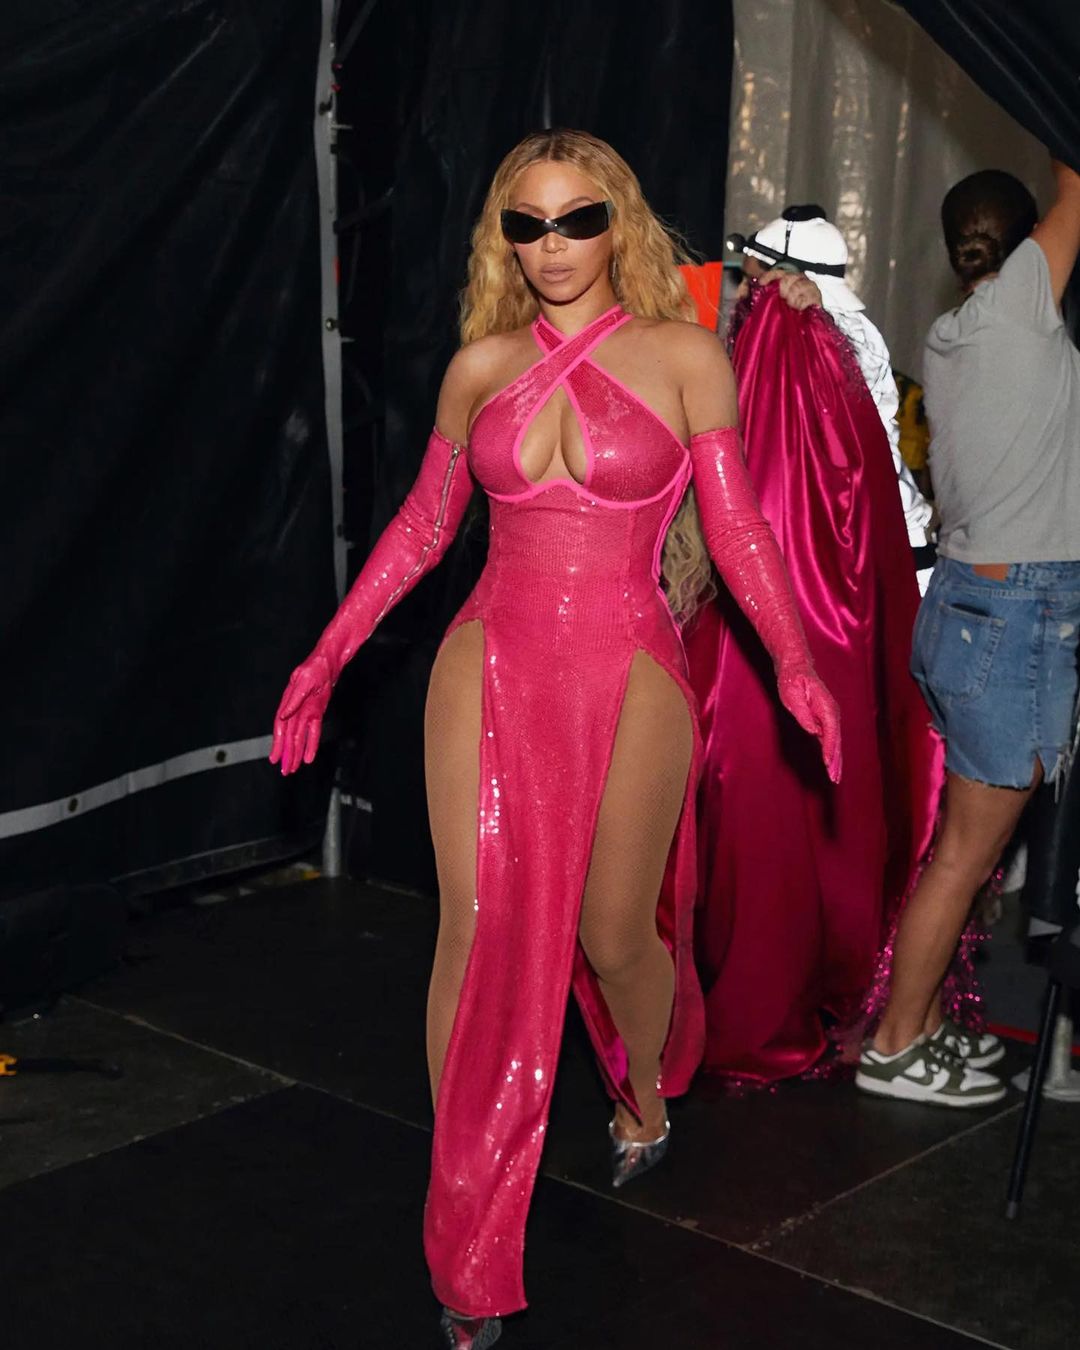 Beyoncé Revealed a Sparkly Hot Pink Ivy Park Dress While